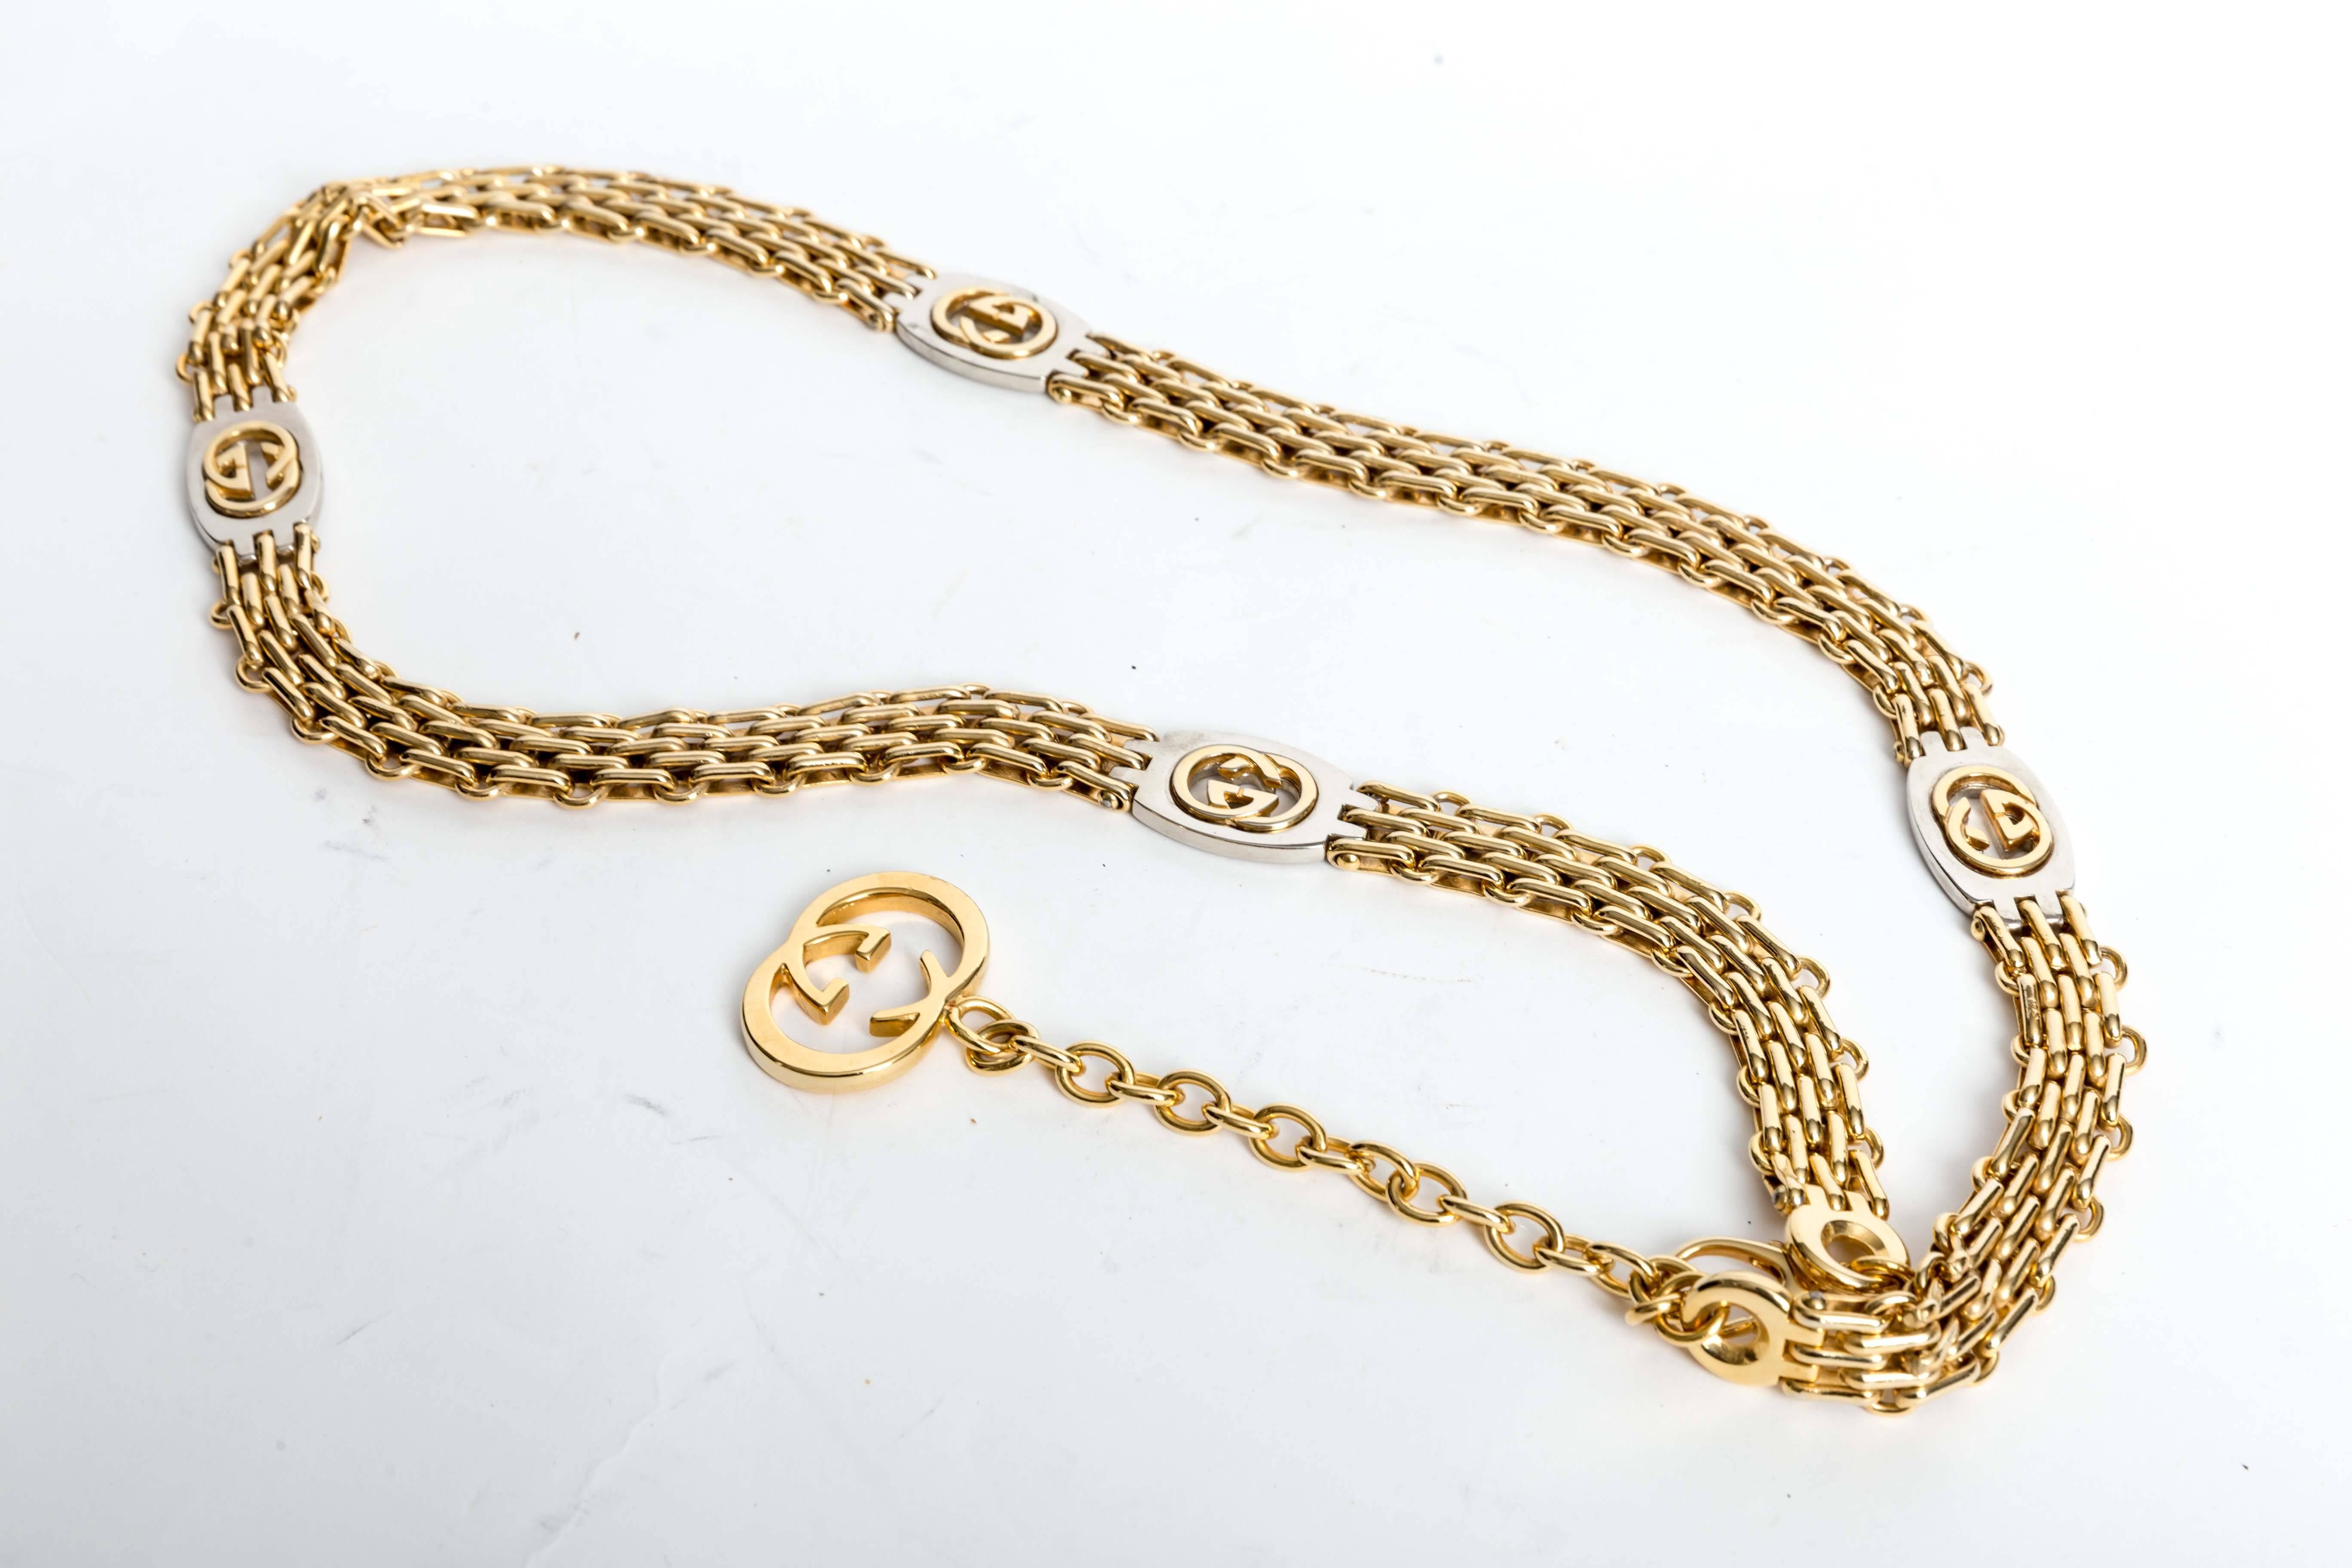 Signed Gucci Made in Italy Vintage Gold Chain Belt with Hanging Gucci Logo Pendant.  This beautiful belt measures 32 inches but can be made shorter,  and the dangling Gucci pendant is 5 inches long. Condition is excellent. There are some scratches